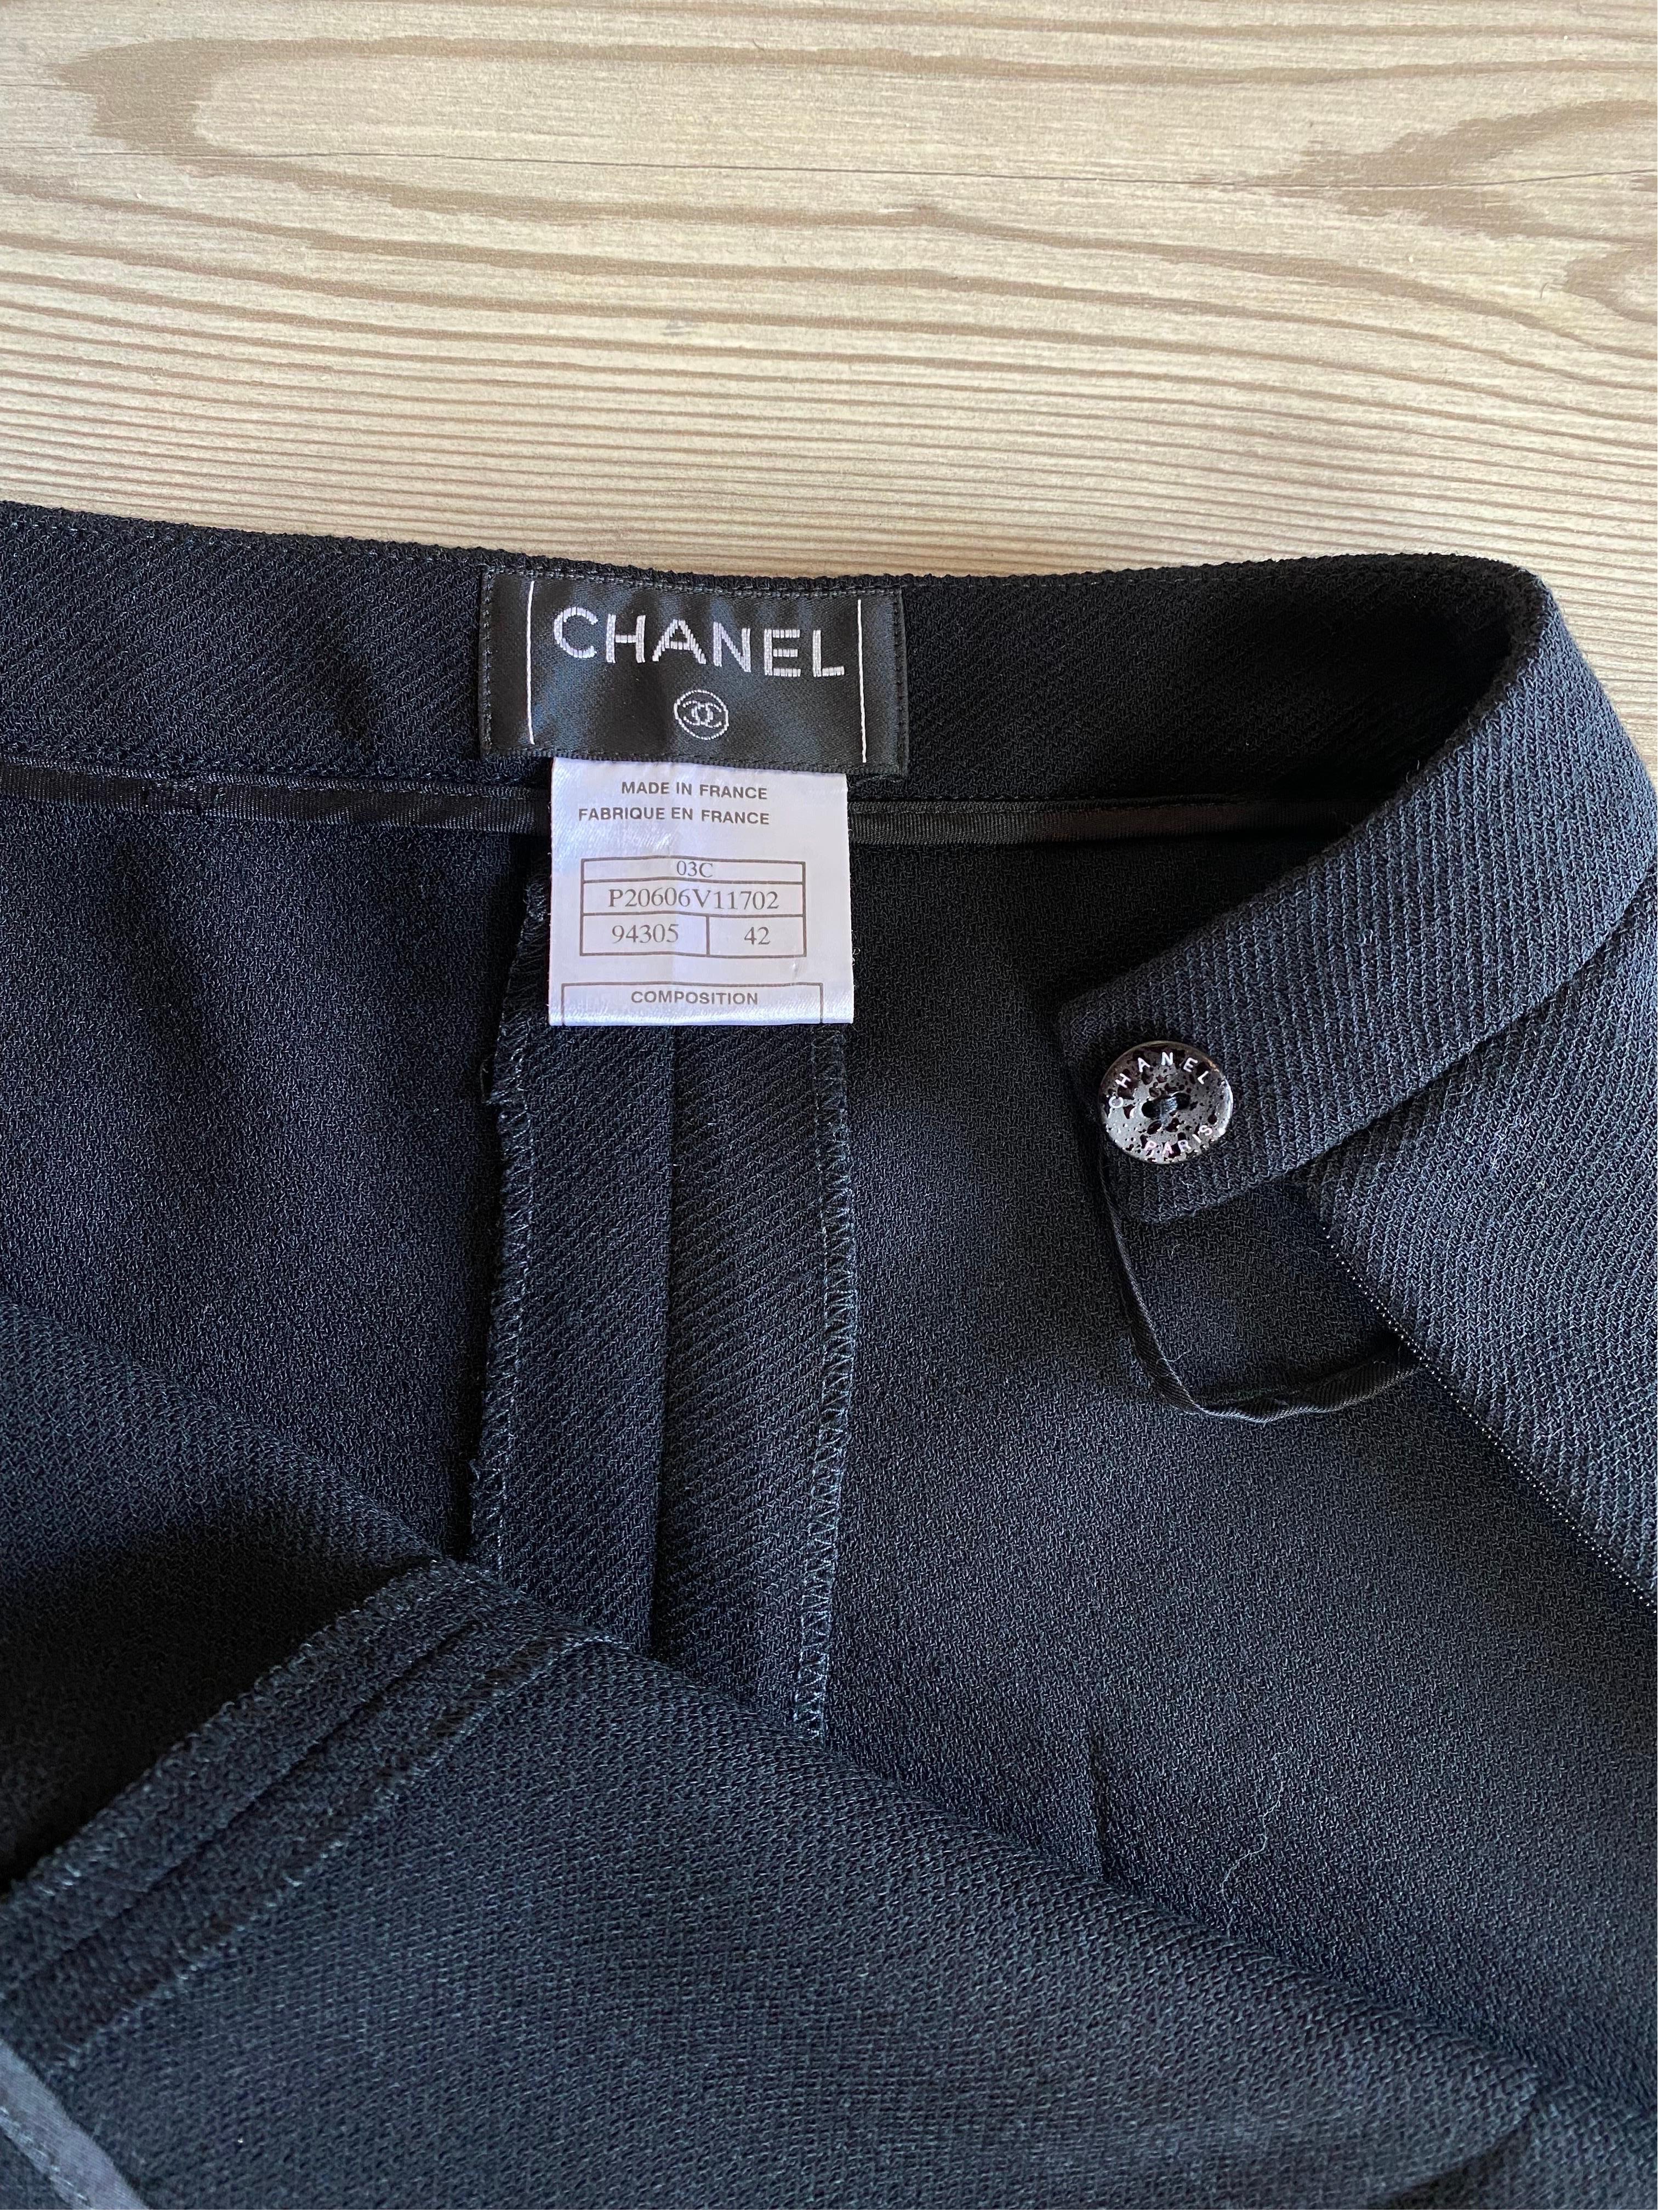 Chanel Black Wool Pants In Good Condition For Sale In Carnate, IT